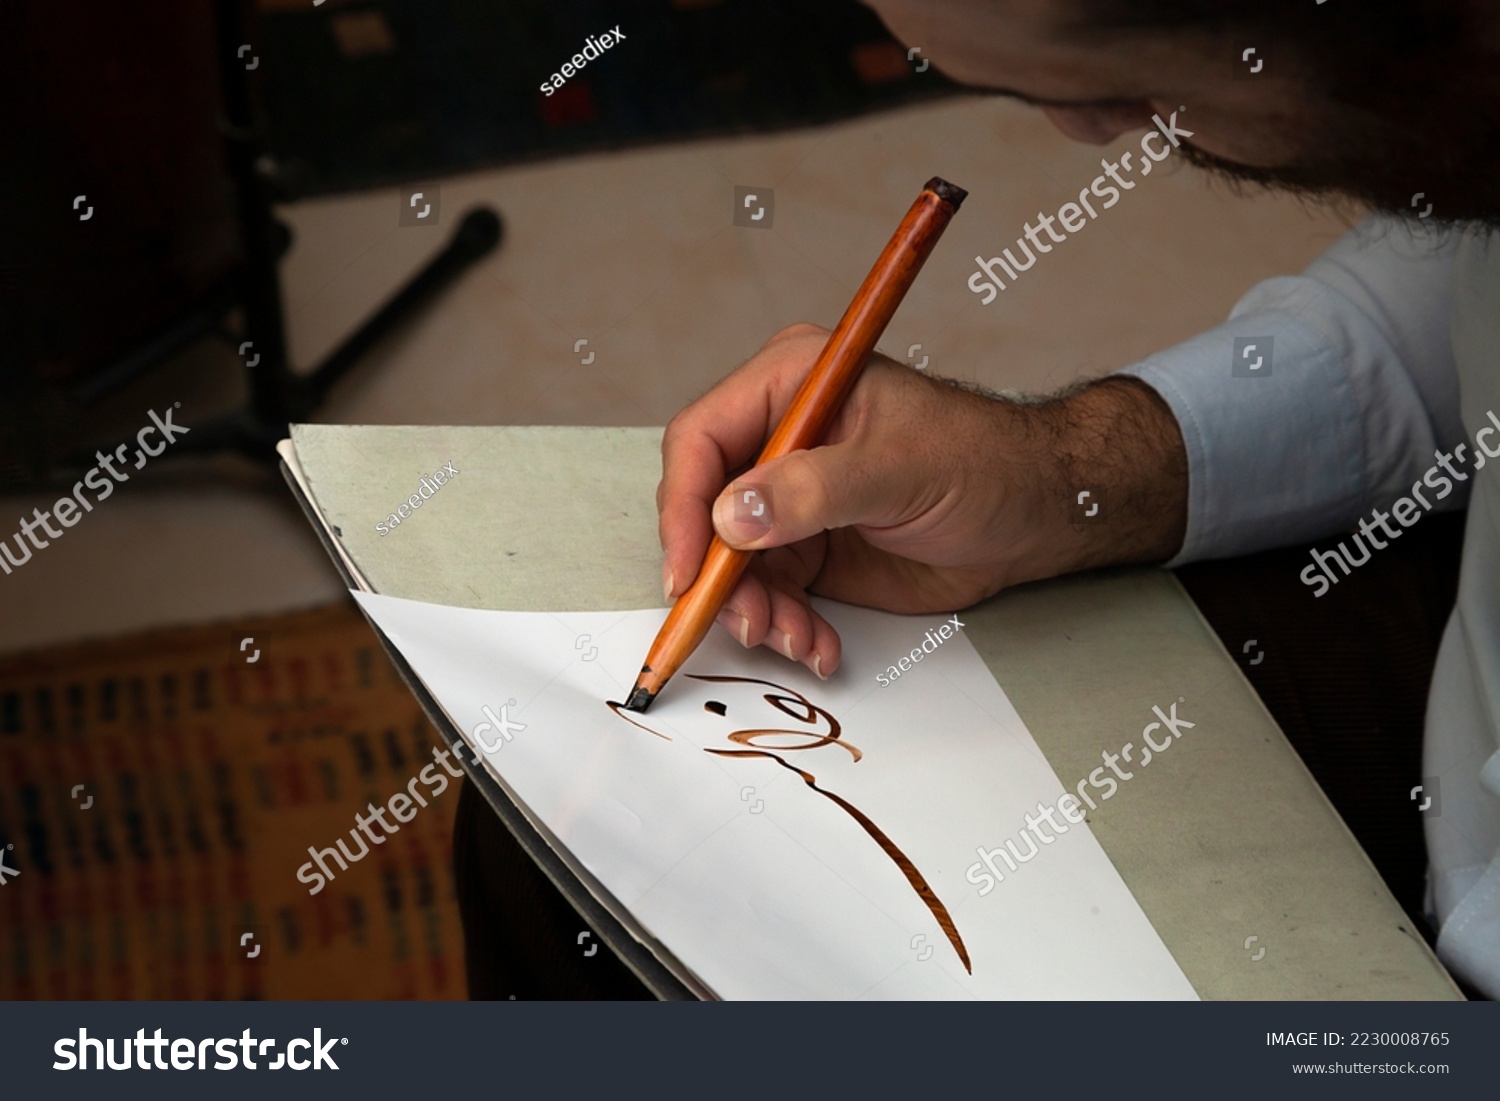 A calligrapher writing with pen and ink. man hands writing arabic calligraphy with ink. Arabic and Persian calligraphy. Writing Nastaliq calligraphy. Abstract and unclear writing. #2230008765